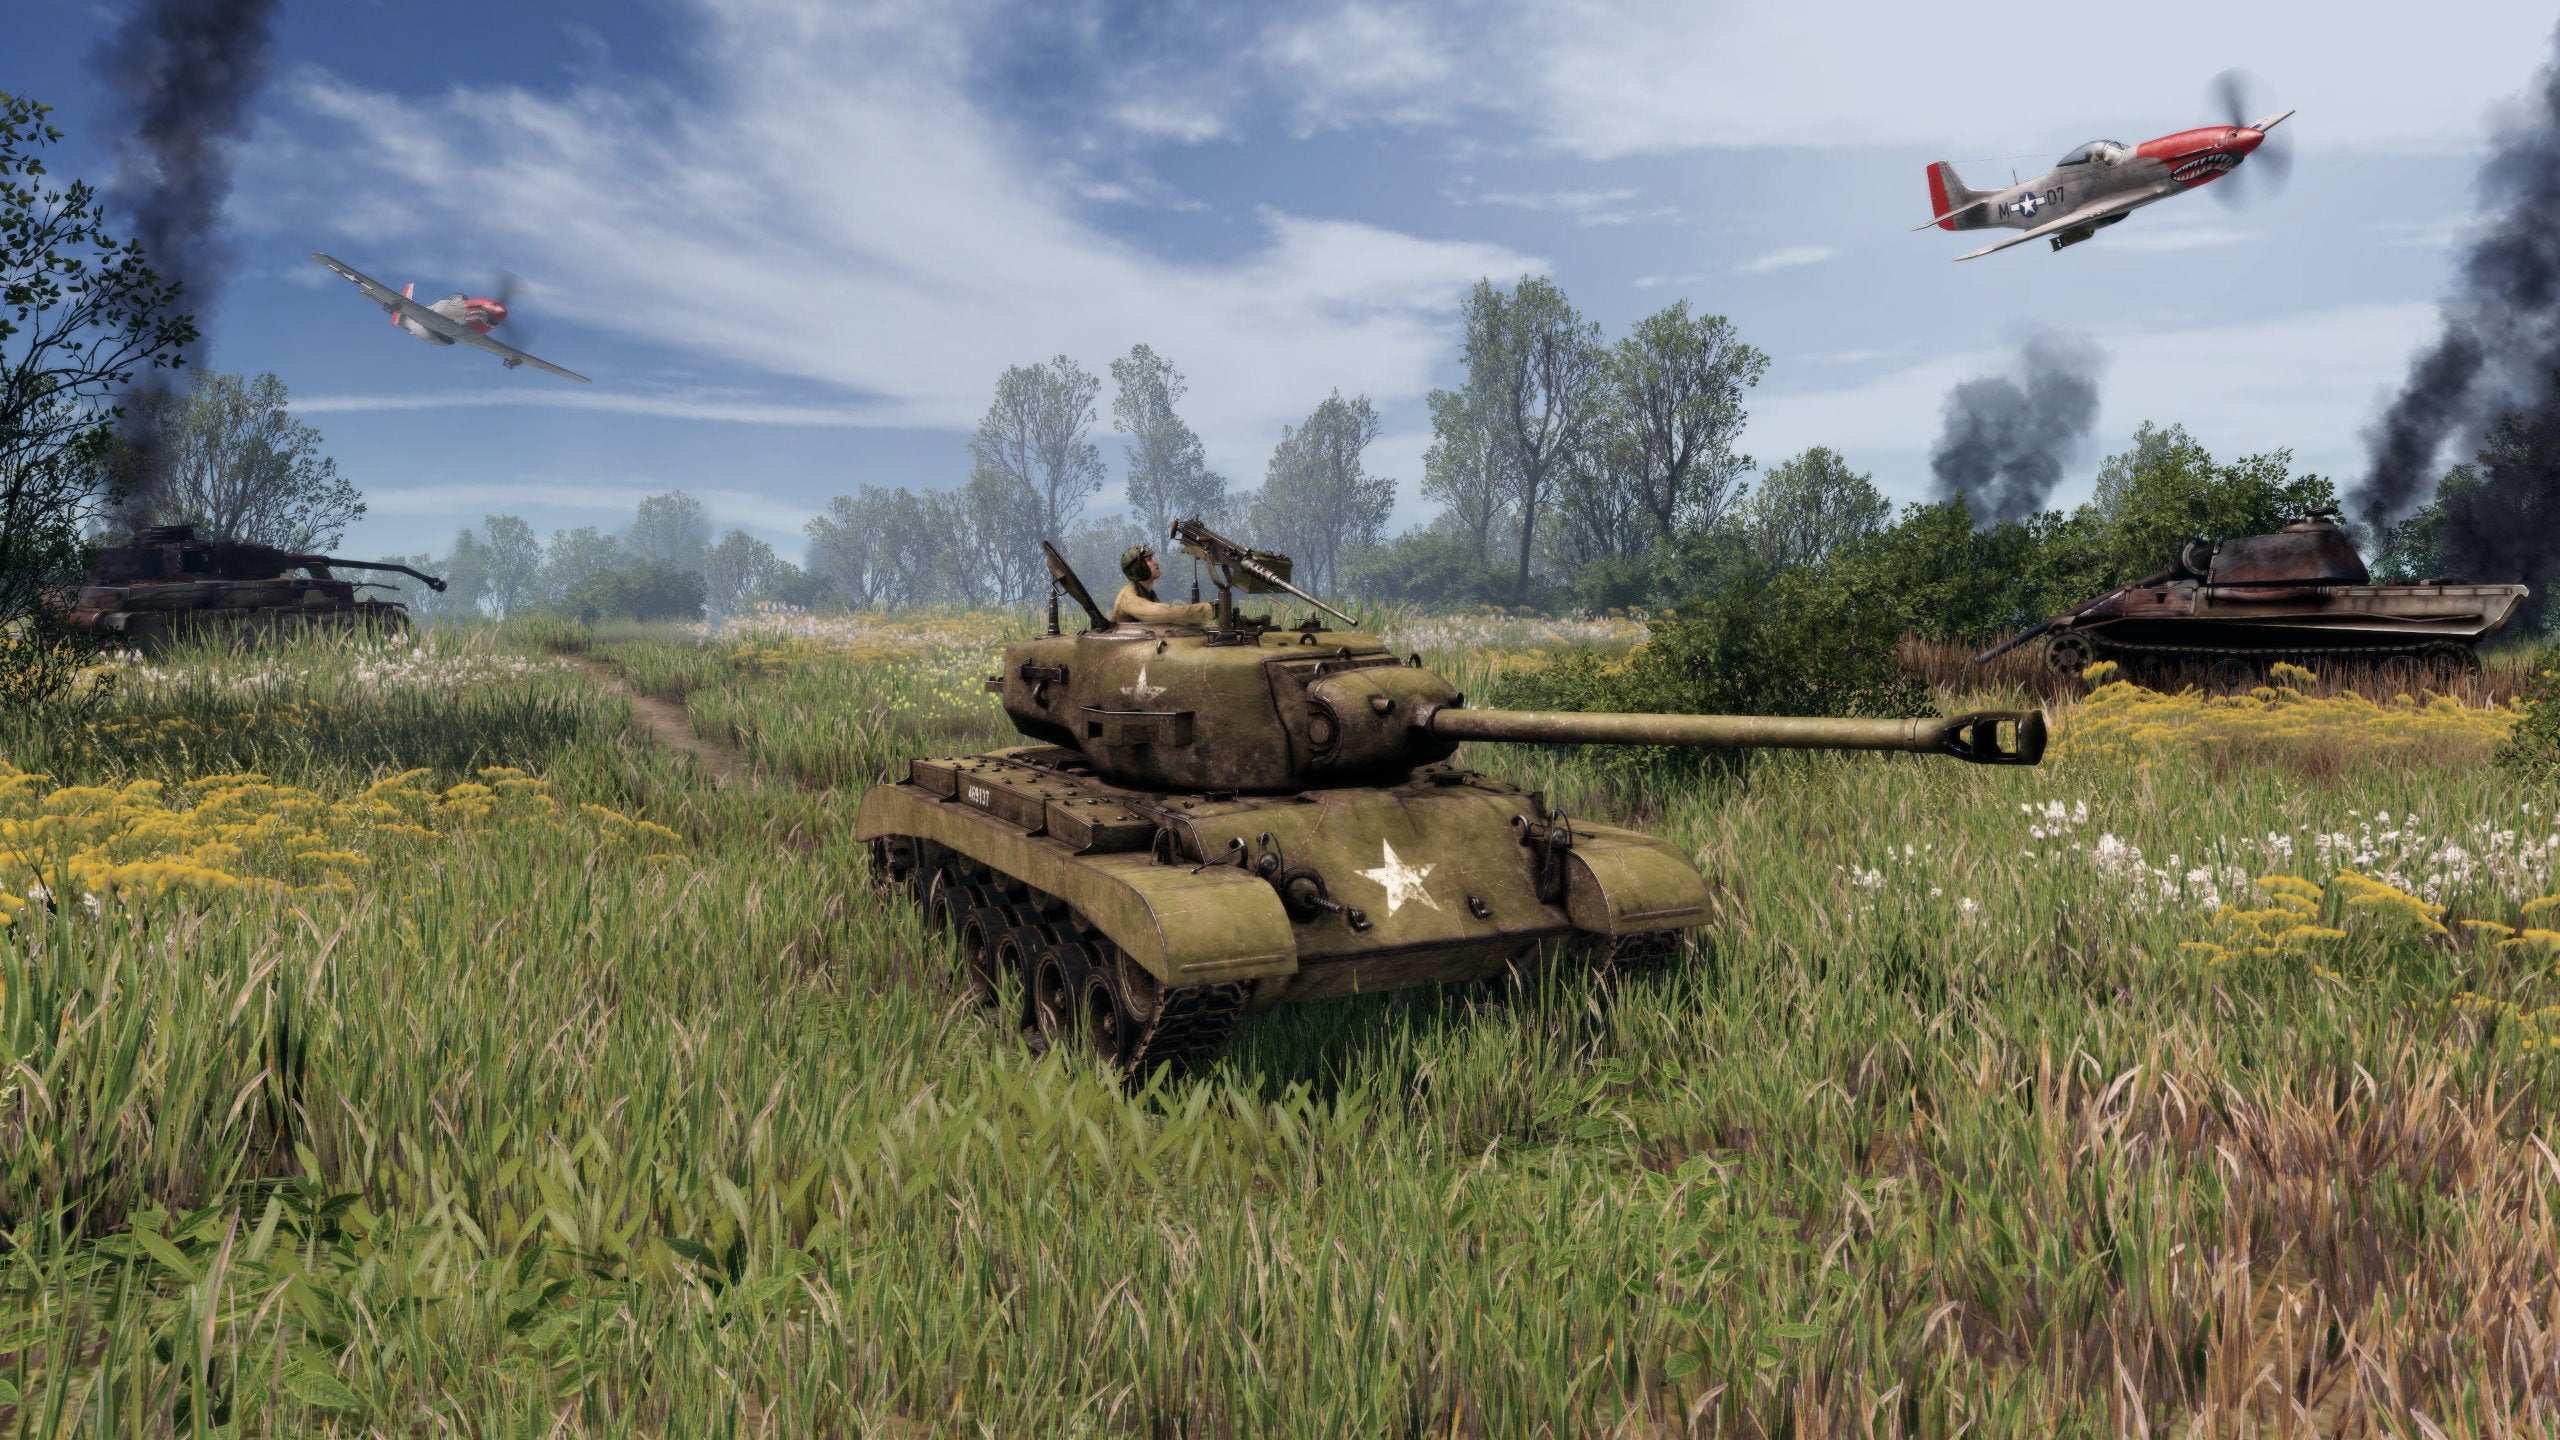 A Pershing tank rolls through a grassy field with planes overhead in Men Of War 2